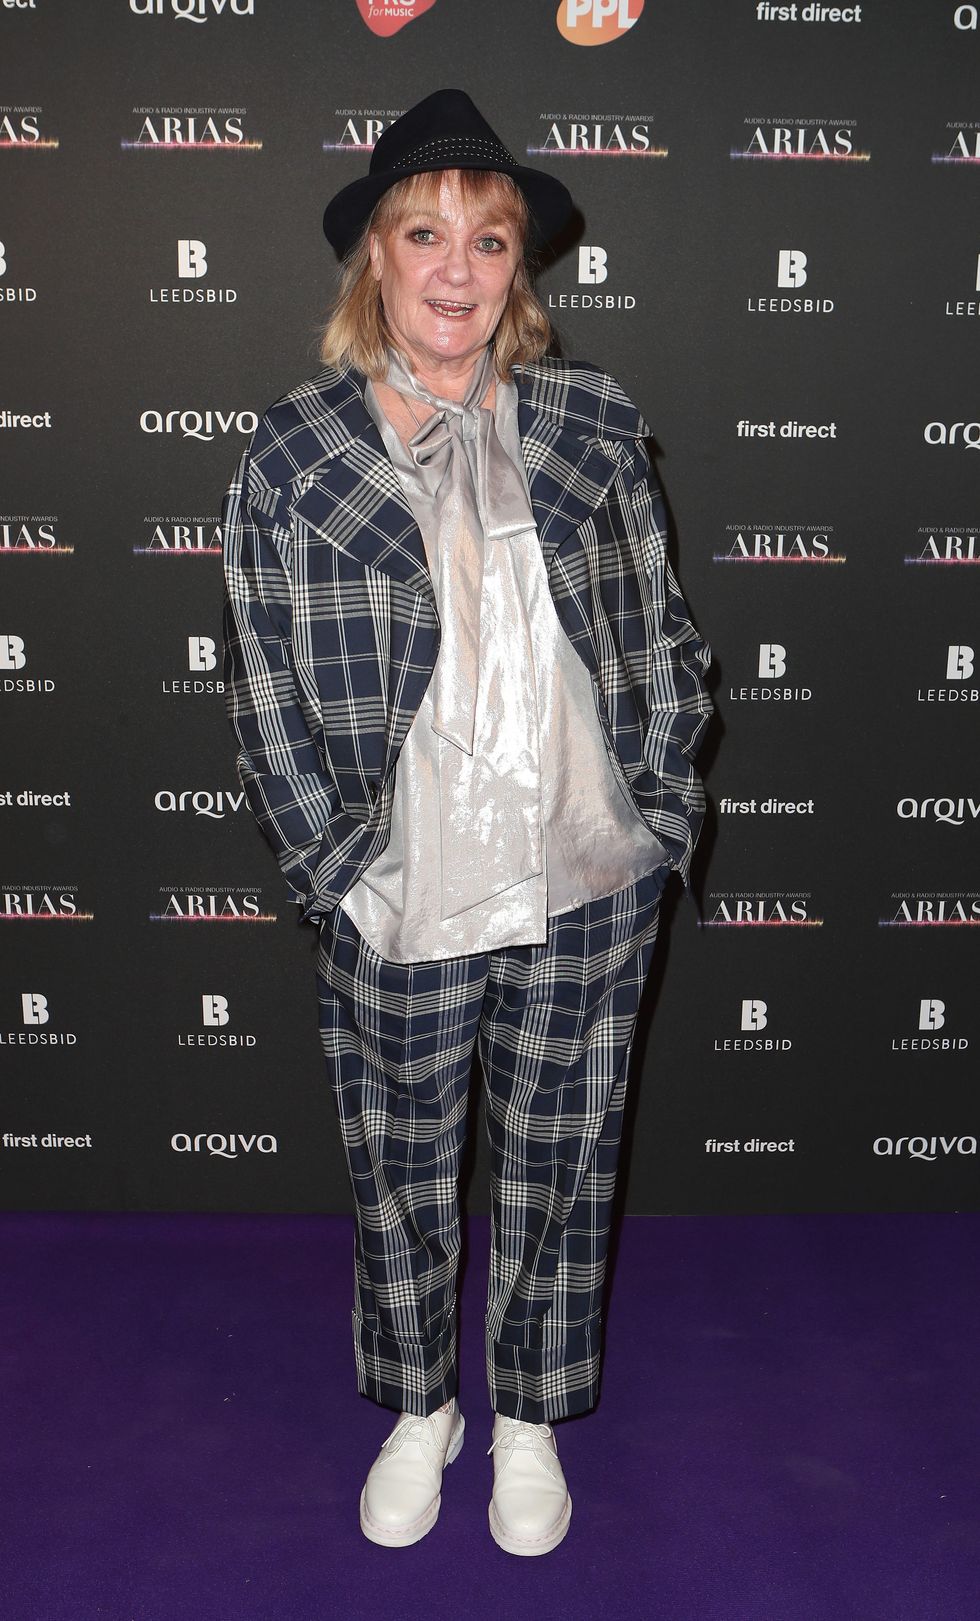 Janice Long at the The Audio and Radio Industry Awards (ARIAS) at the First Direct Arena in Leeds.